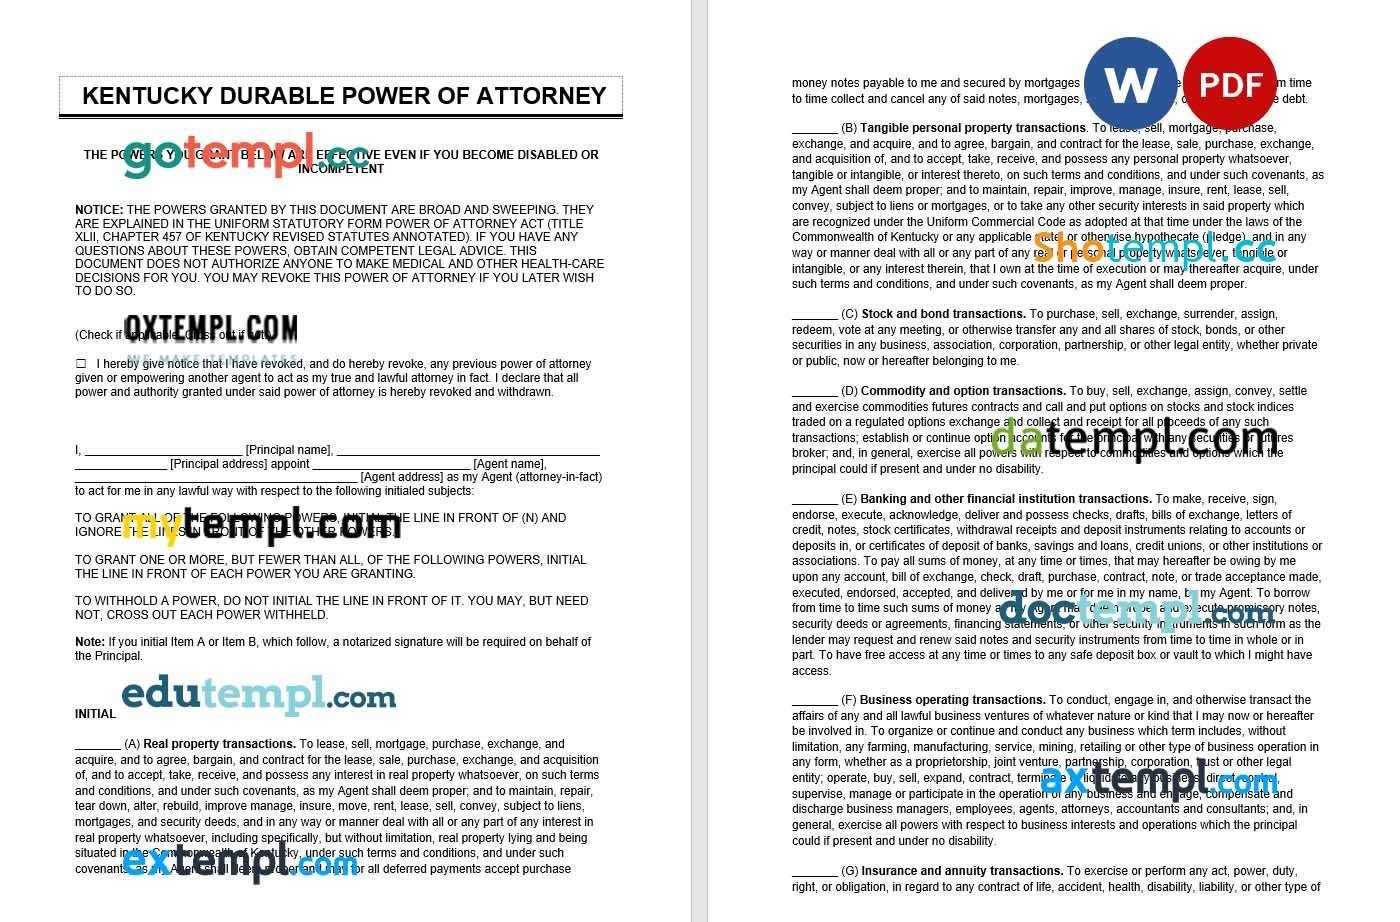 Kentucky Durable Power of Attorney example, fully editable